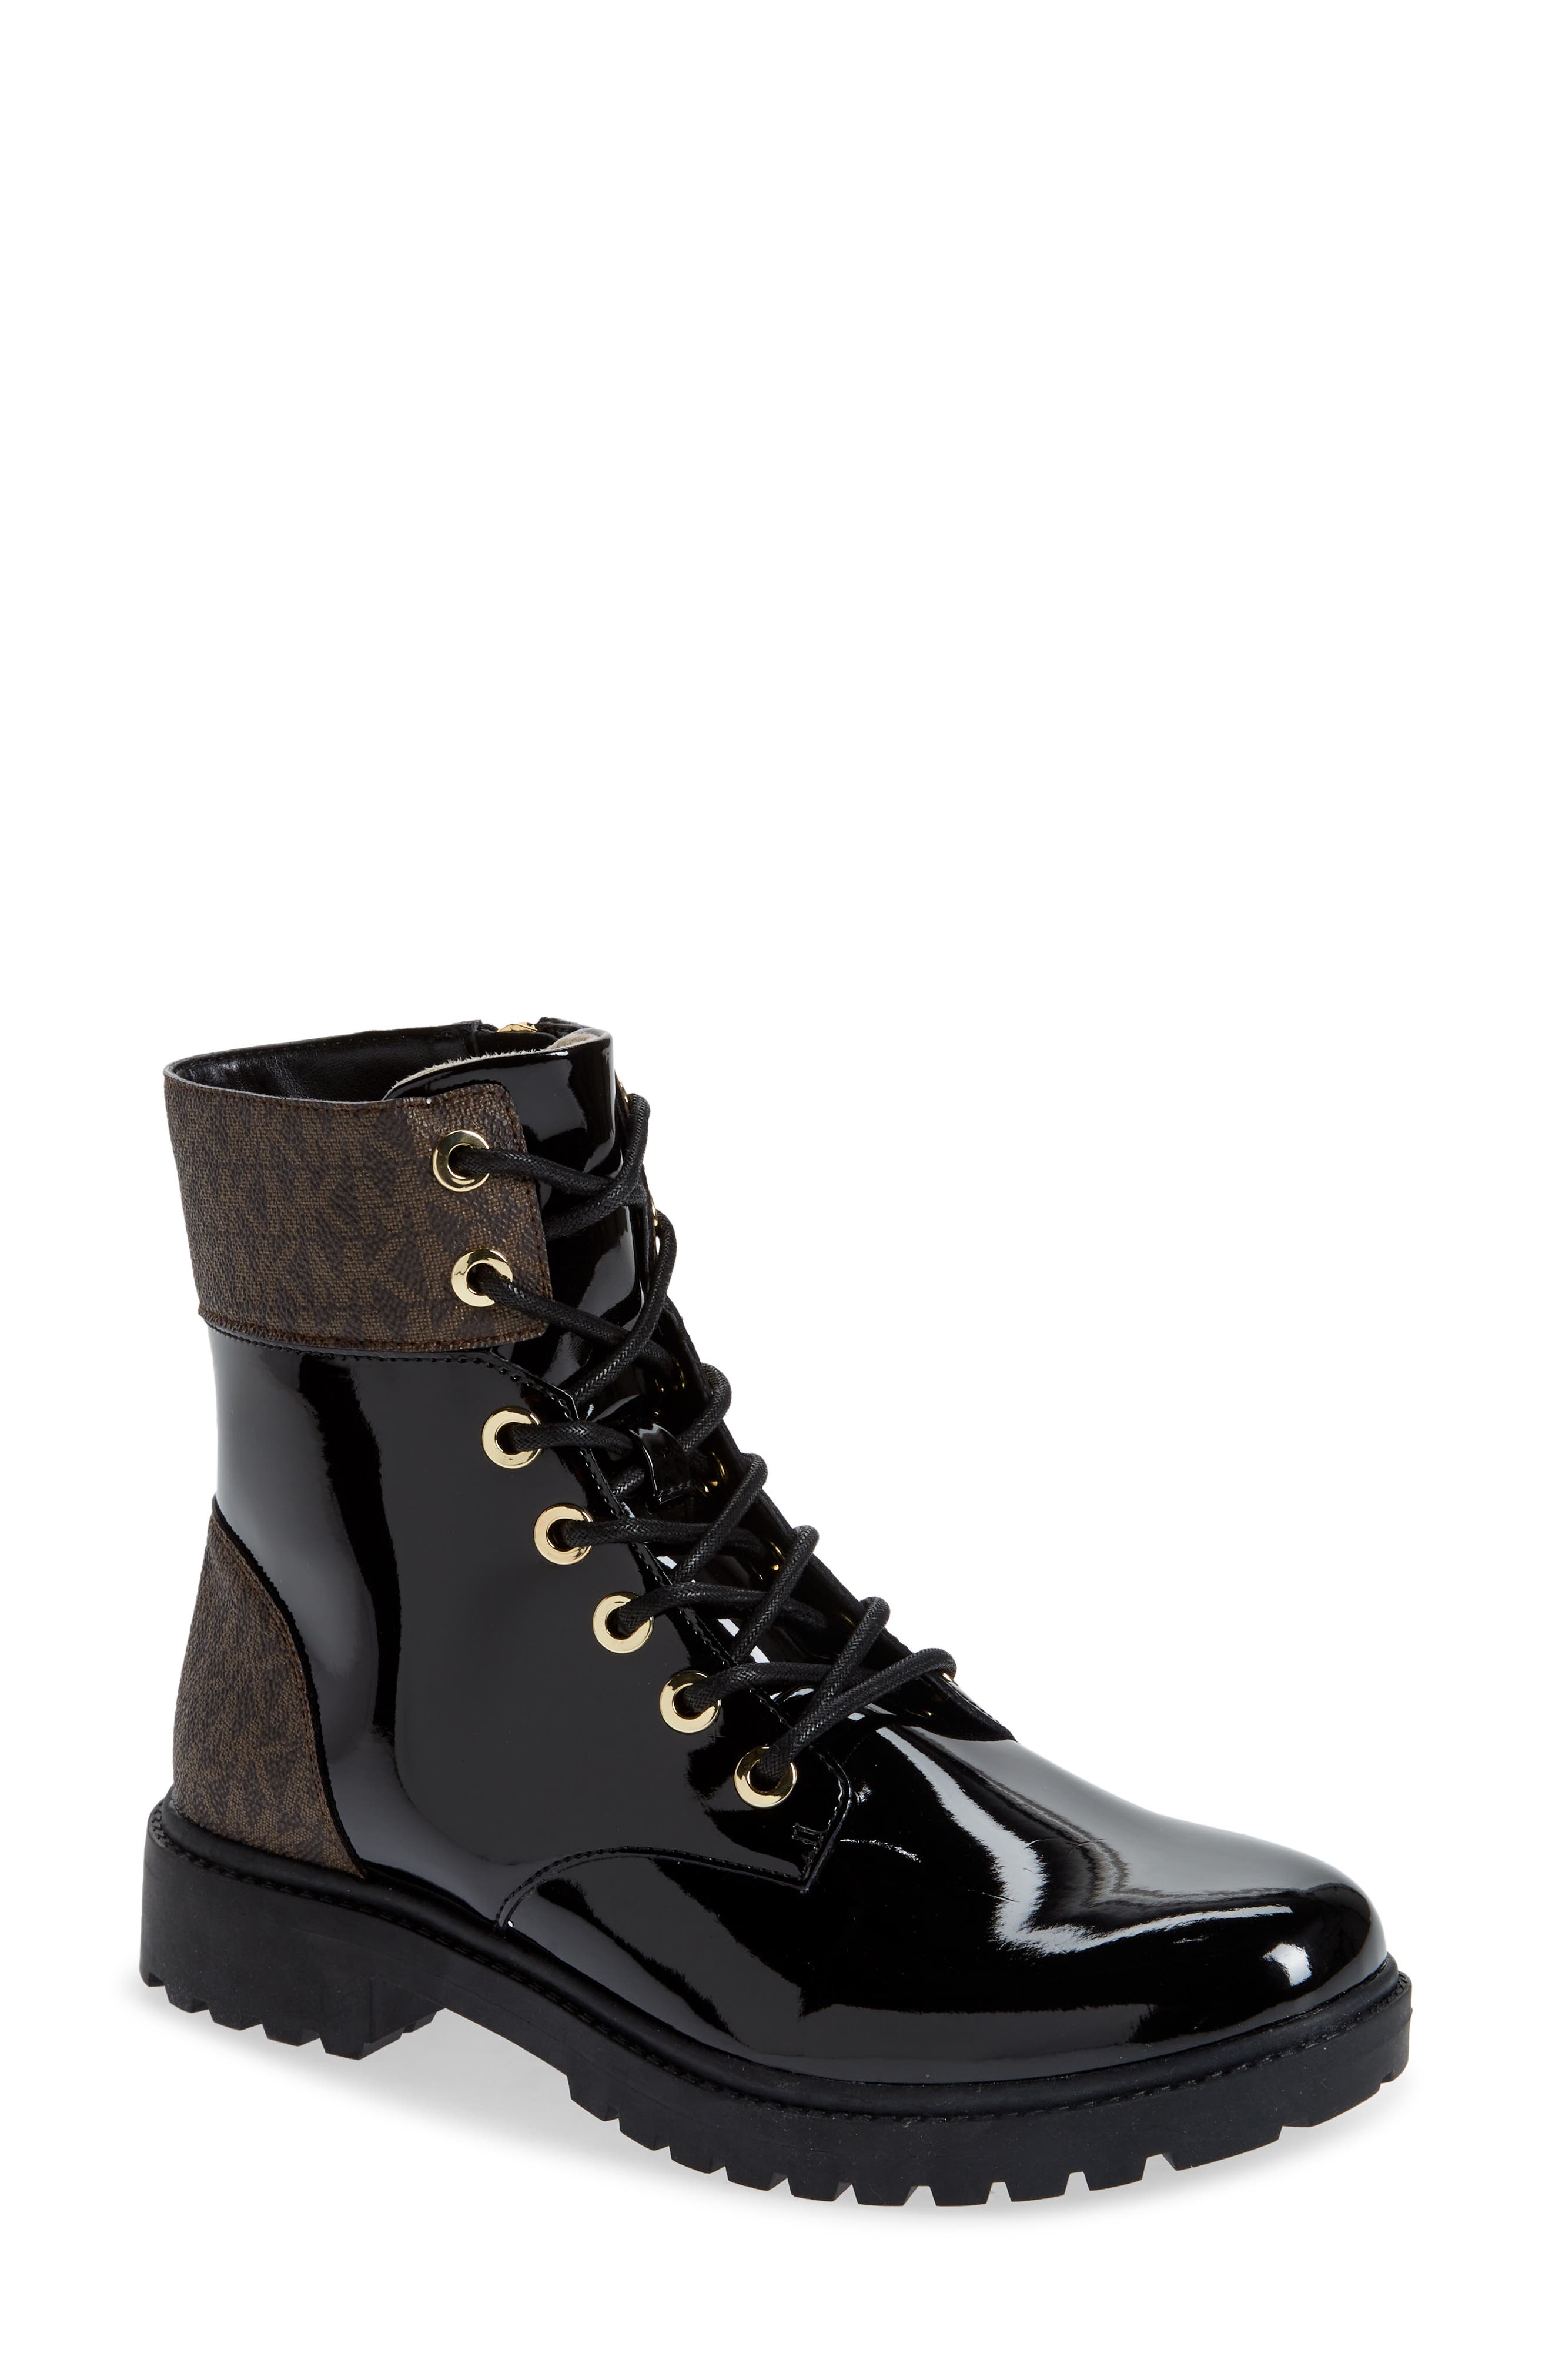 UPC 195512475504 product image for MICHAEL Michael Kors Alistair Lace-Up Boot in Black/Brown at Nordstrom, Size 5.5 | upcitemdb.com